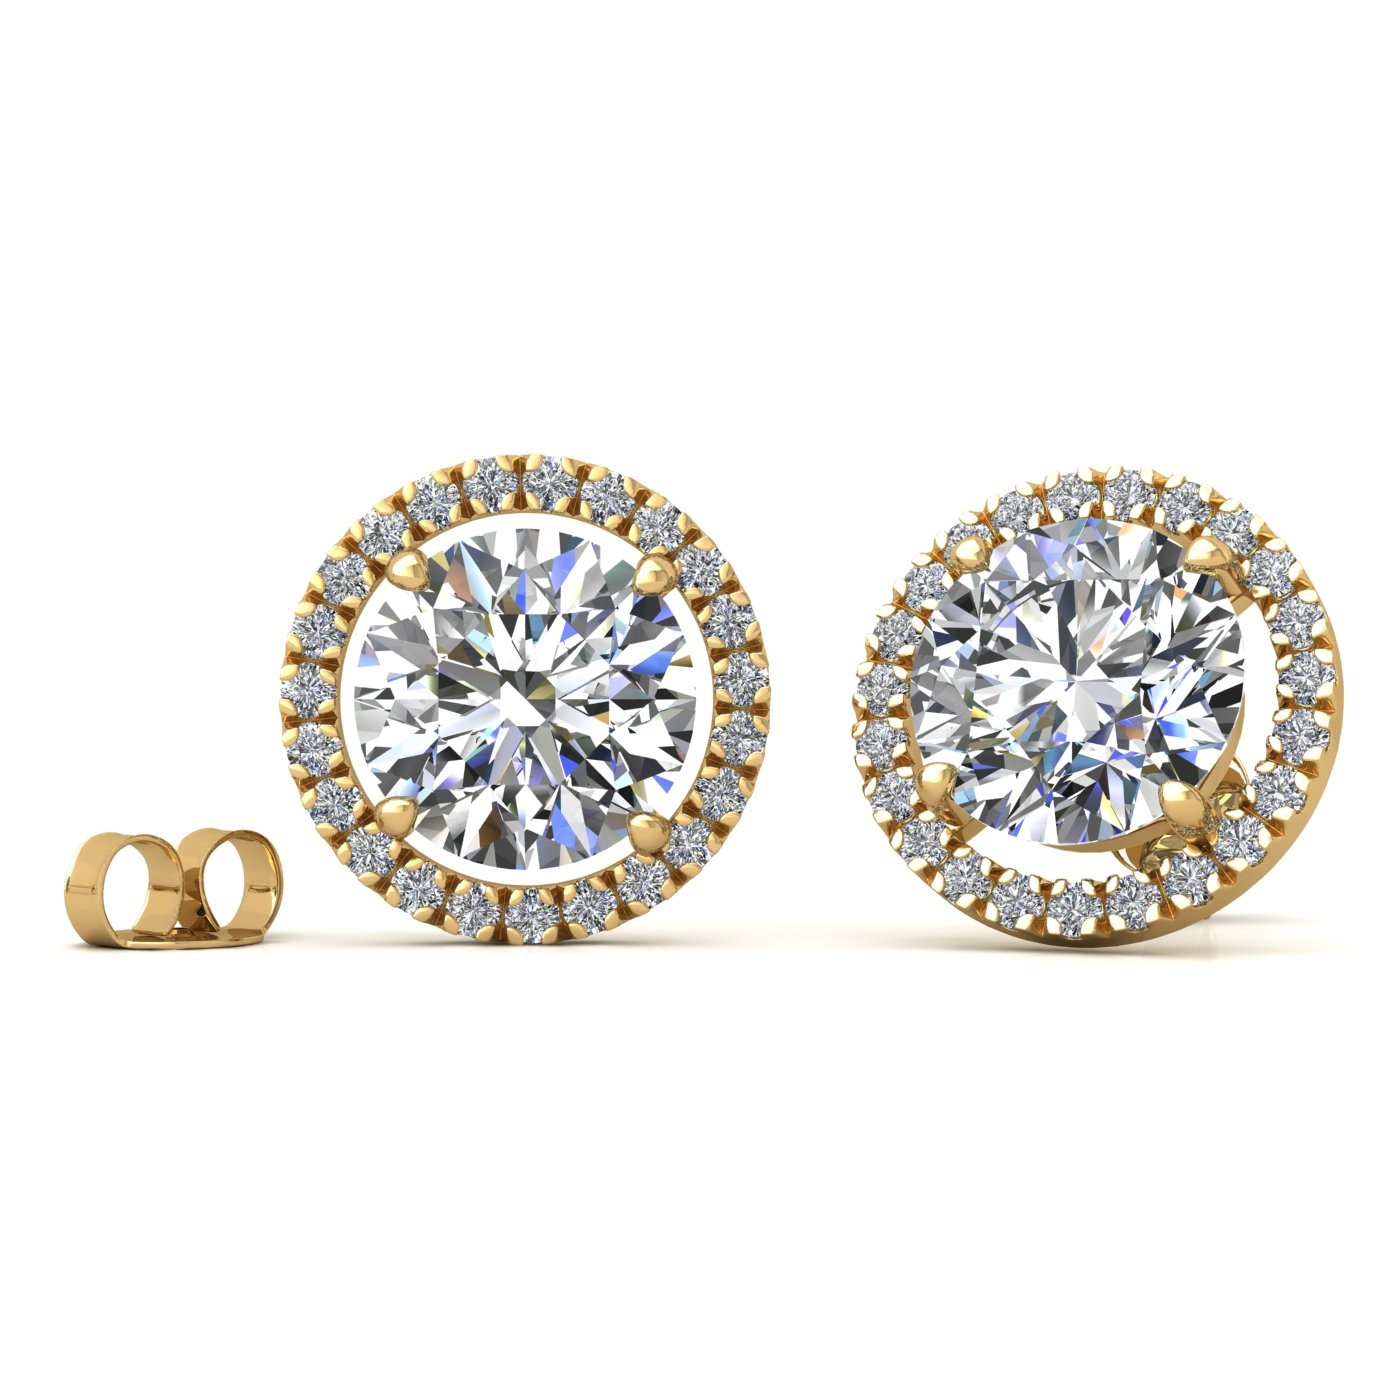 18k yellow gold  0,3 ct each (0,6 tcw) 4 prongs round brilliant cut halo diamond earring studs Photos & images